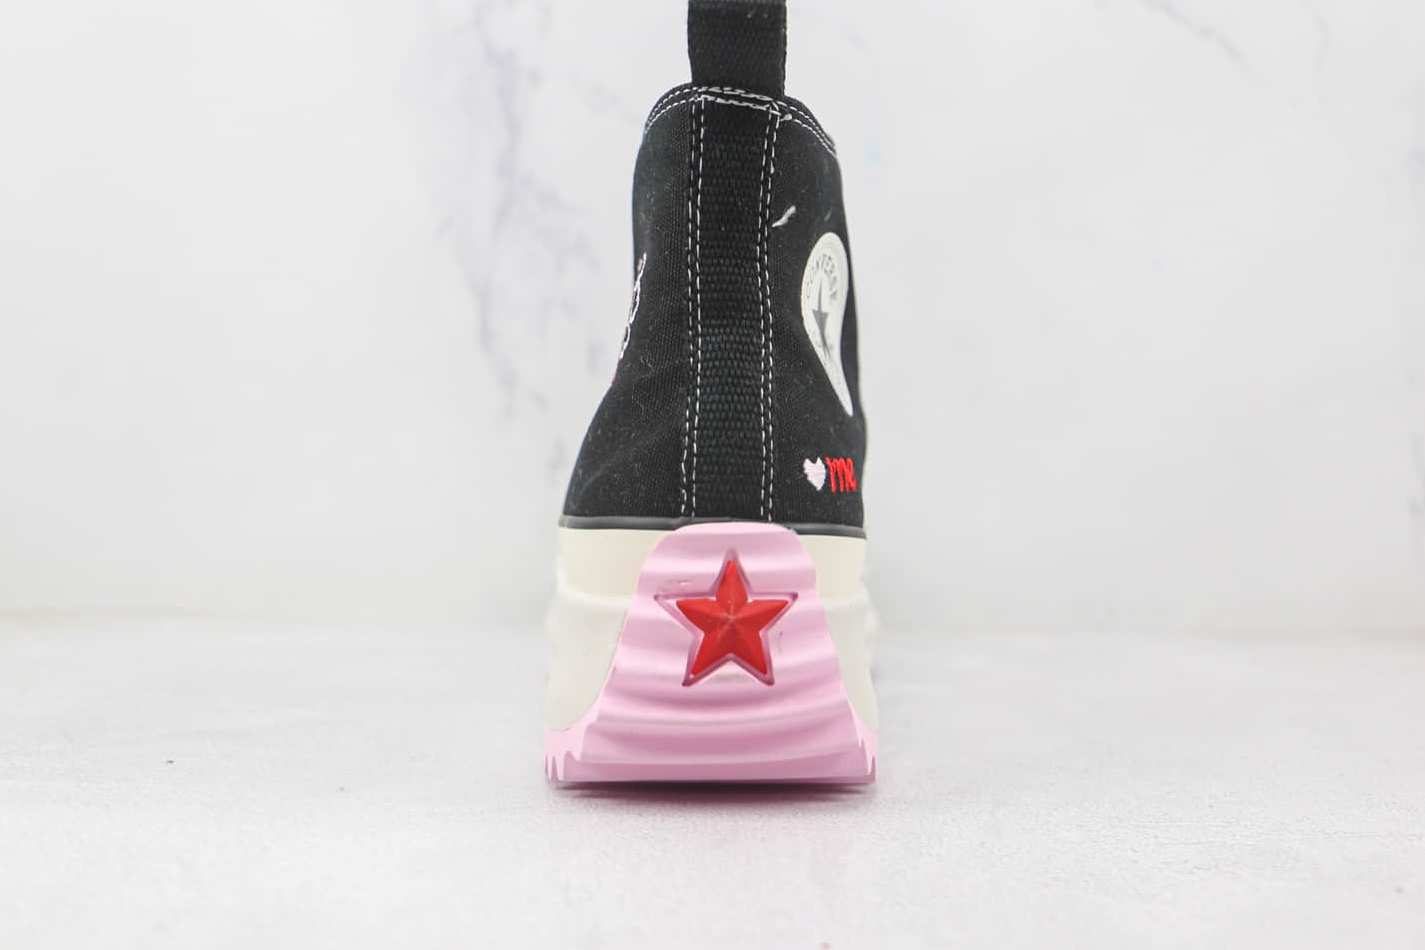 Converse Run Star Hike High 'Valentine's With Love' A01598C - Exclusive Romantic Sneaker Limited Edition